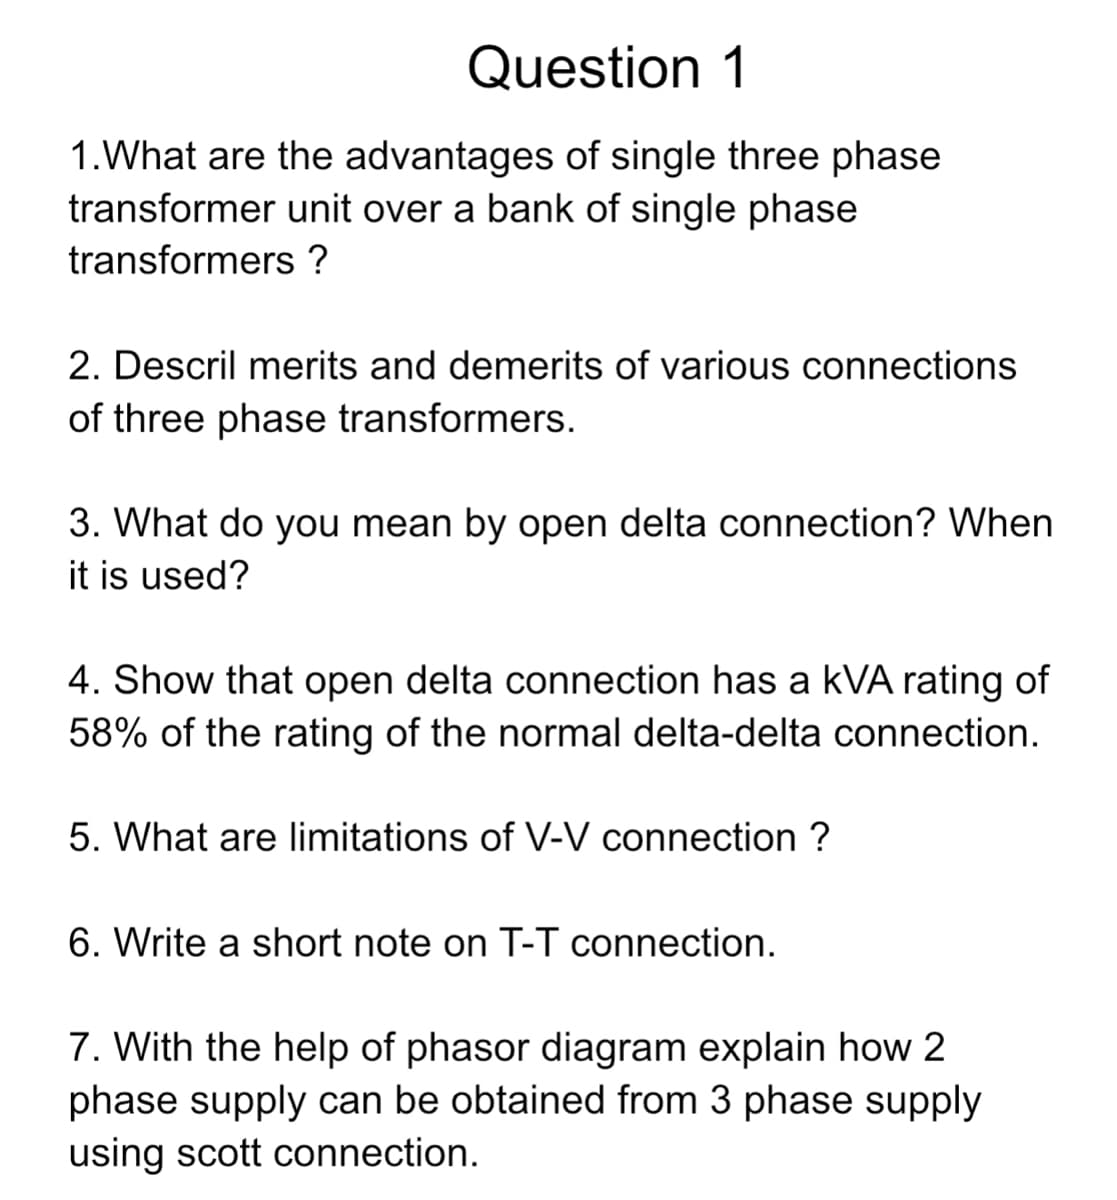 Question 1
1. What are the advantages of single three phase
transformer unit over a bank of single phase
transformers ?
2. Descril merits and demerits of various connections
of three phase transformers.
3. What do you mean by open delta connection? When
it is used?
4. Show that open delta connection has a kVA rating of
58% of the rating of the normal delta-delta connection.
5. What are limitations of V-V connection ?
6. Write a short note on T-T connection.
7. With the help of phasor diagram explain how 2
phase supply can be obtained from 3 phase supply
using scott connection.